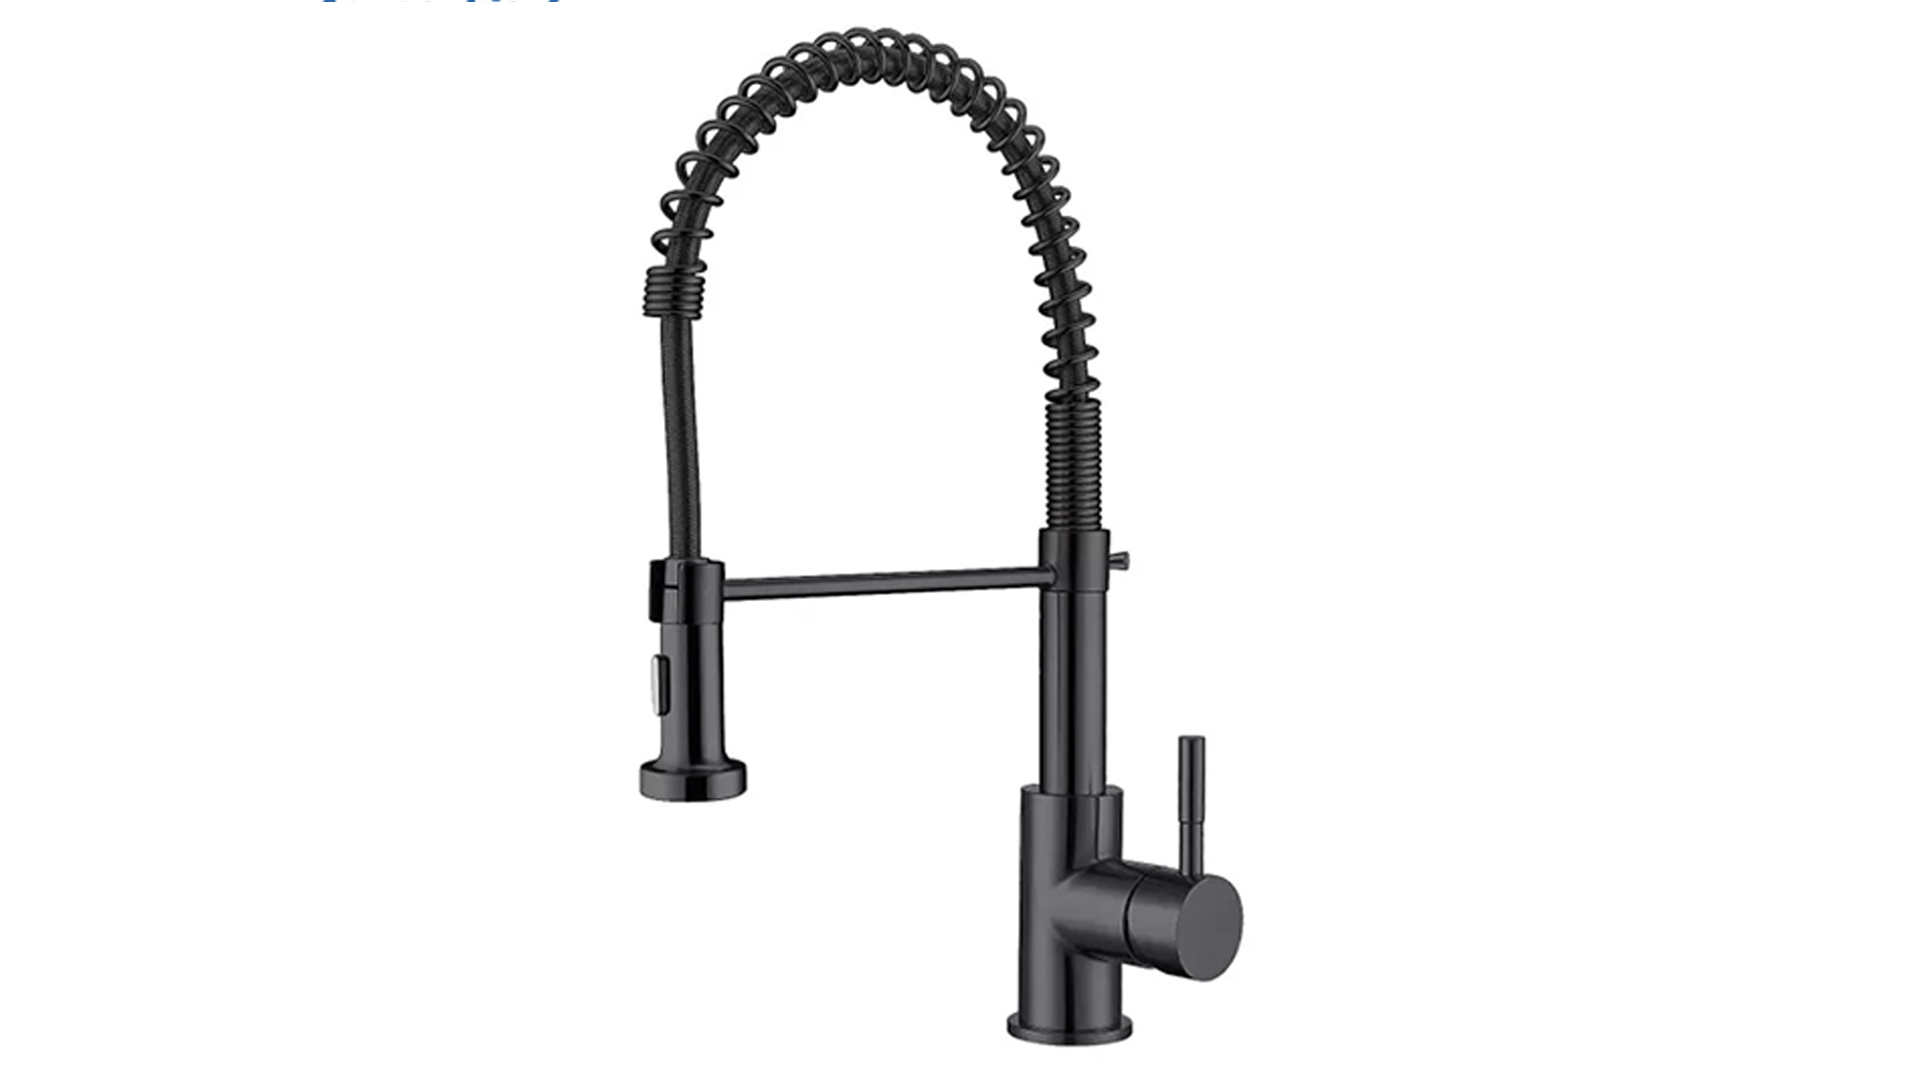 Single Hole Kitchen Faucet with Pull-out Spray and Forward Only Lever Handle